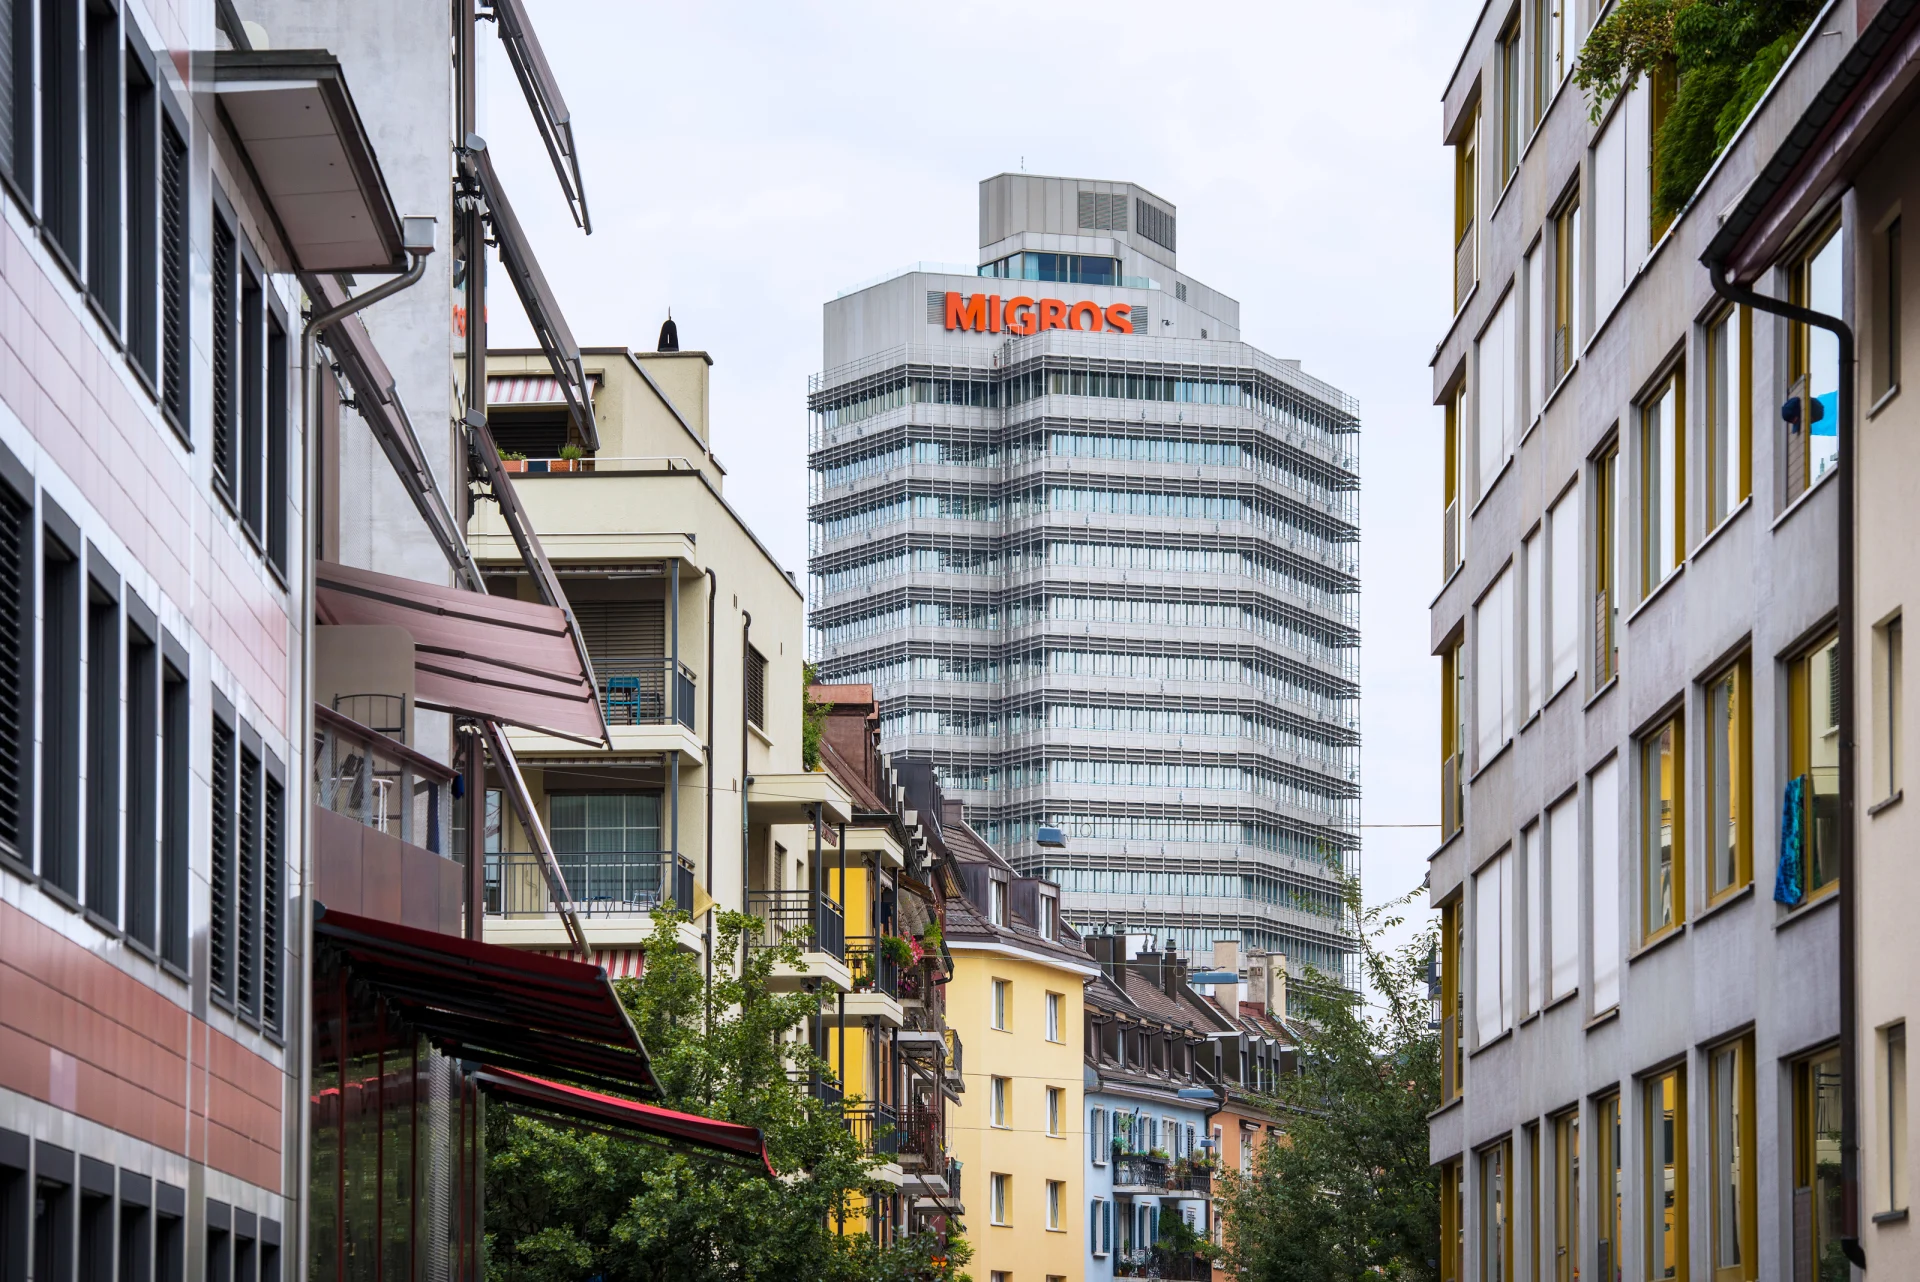 The view of the Migros high-rise on Limmatplatz